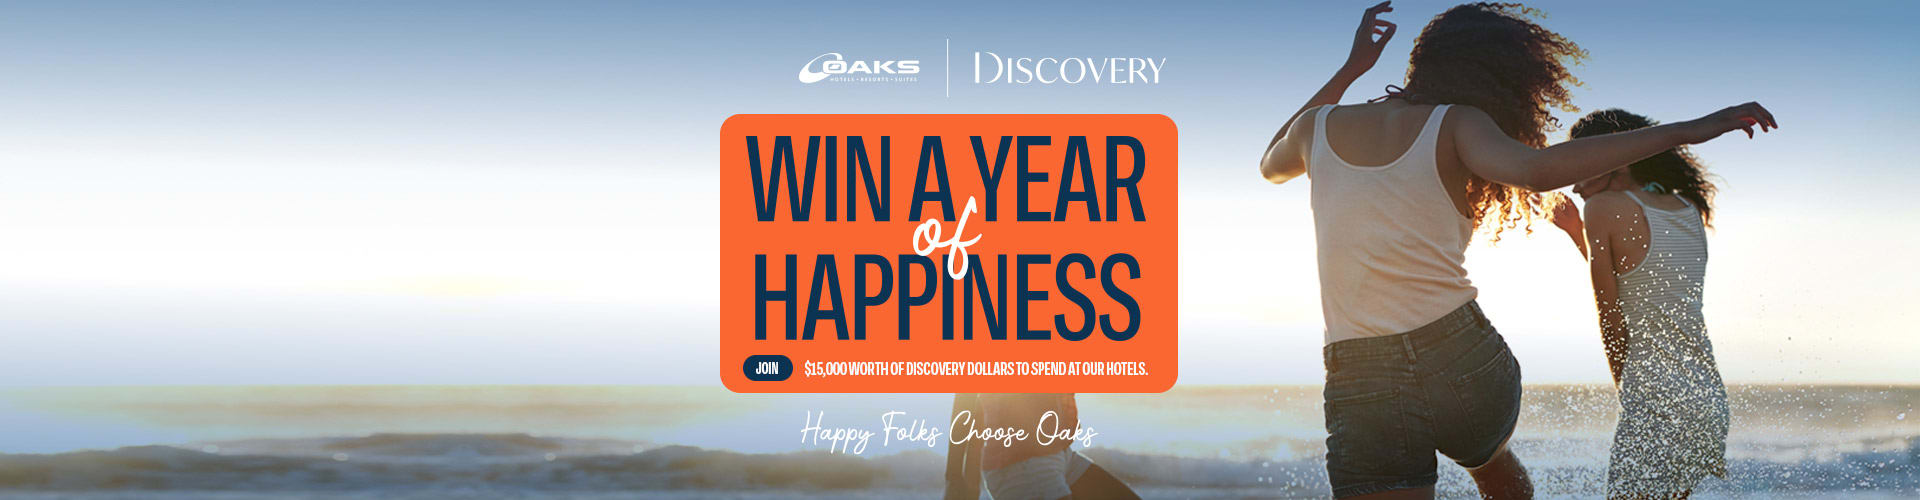 Oaks DISCOVERY competition Win a Year of Happiness Banner 